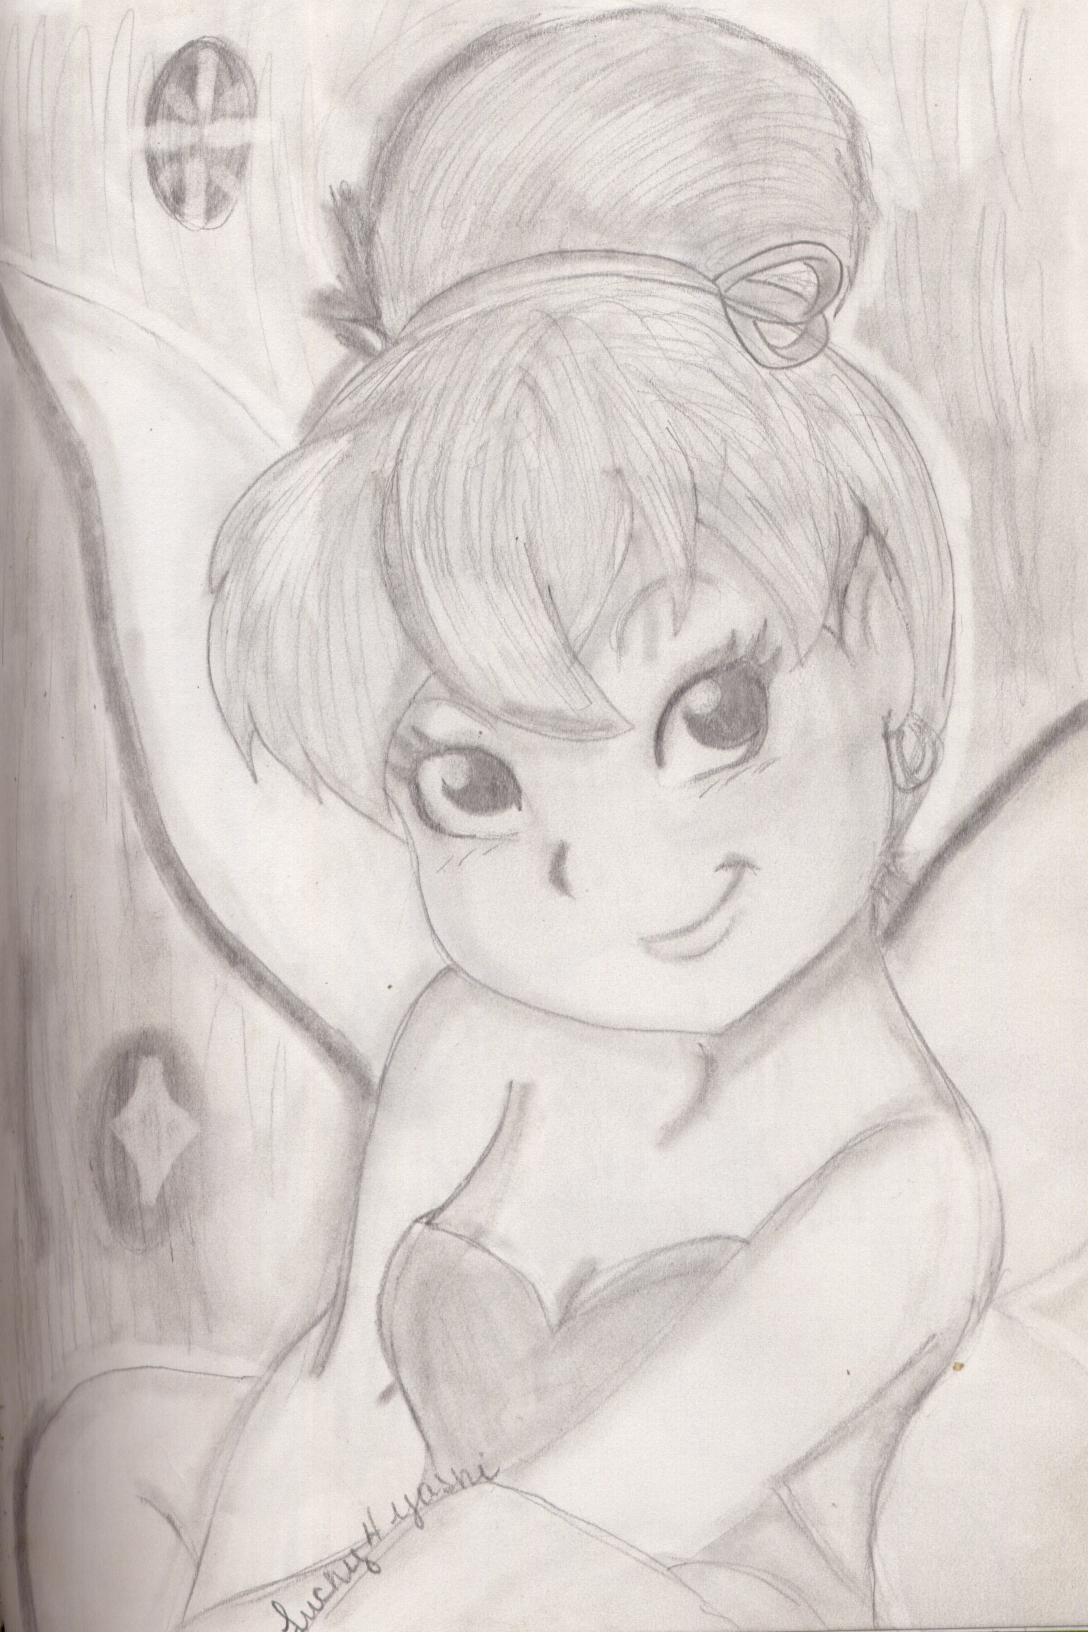 tinkerbell by lucky4yoshi